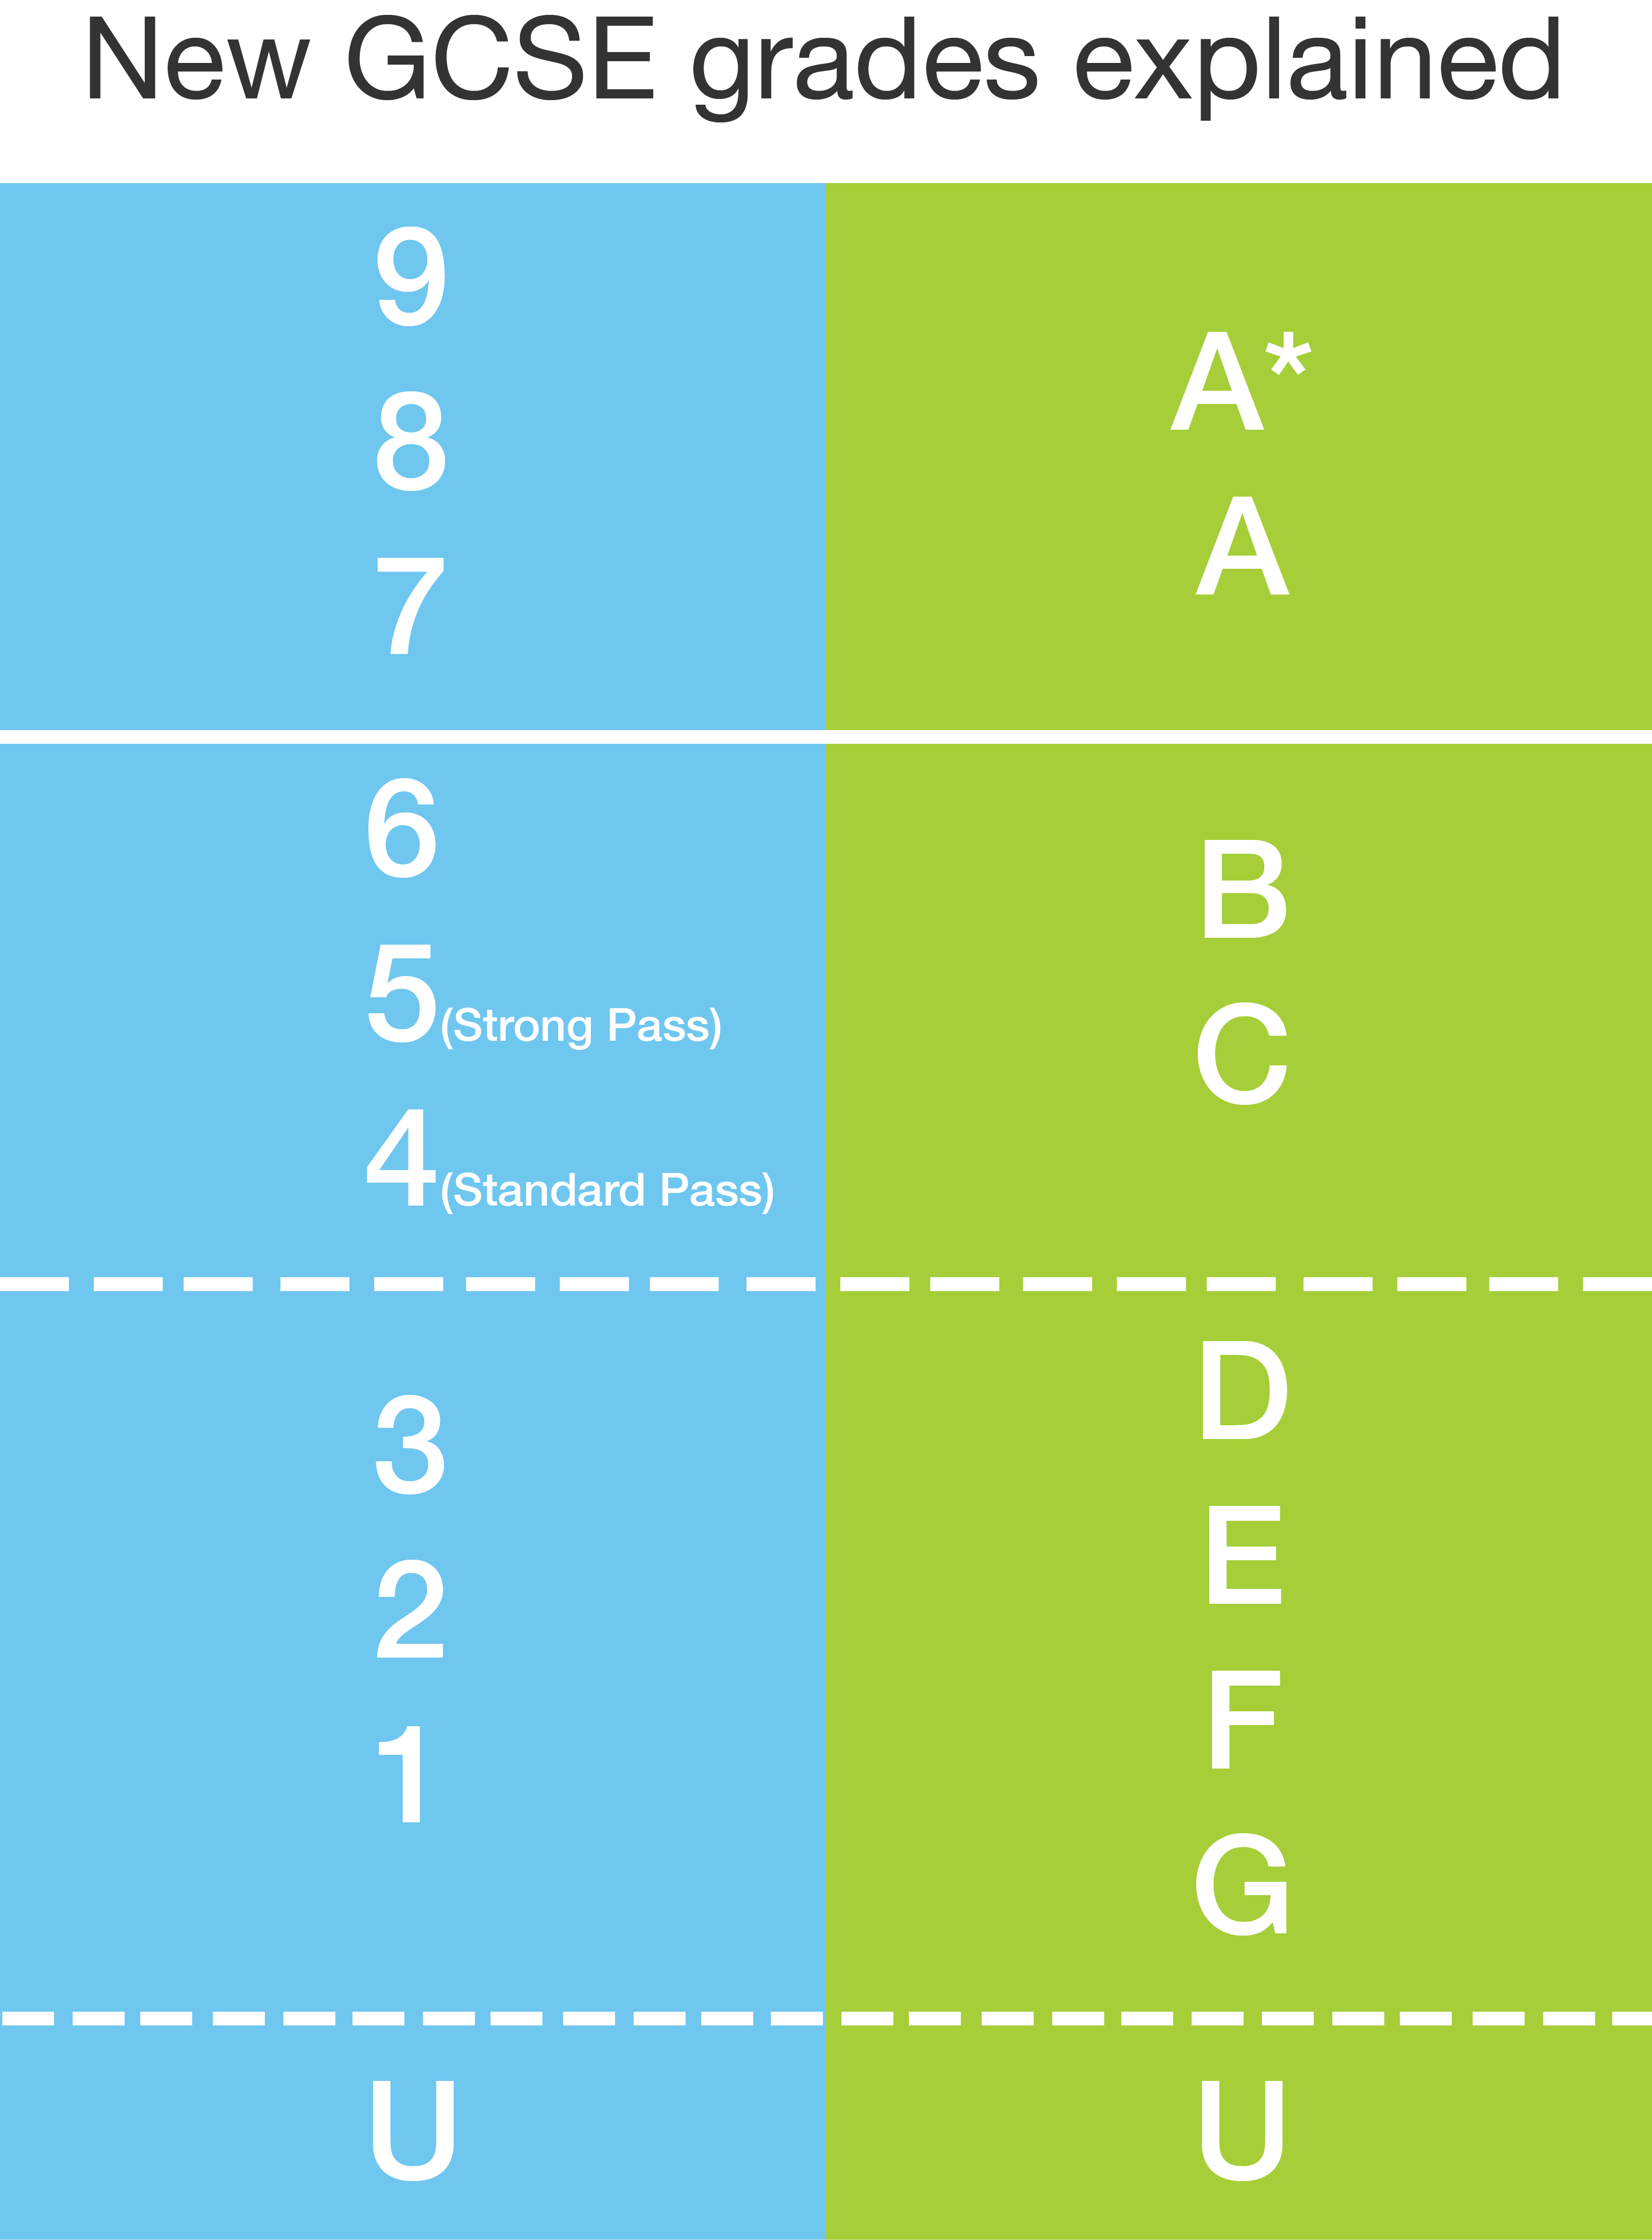 GCSEs: What does an 'A' grade mean?